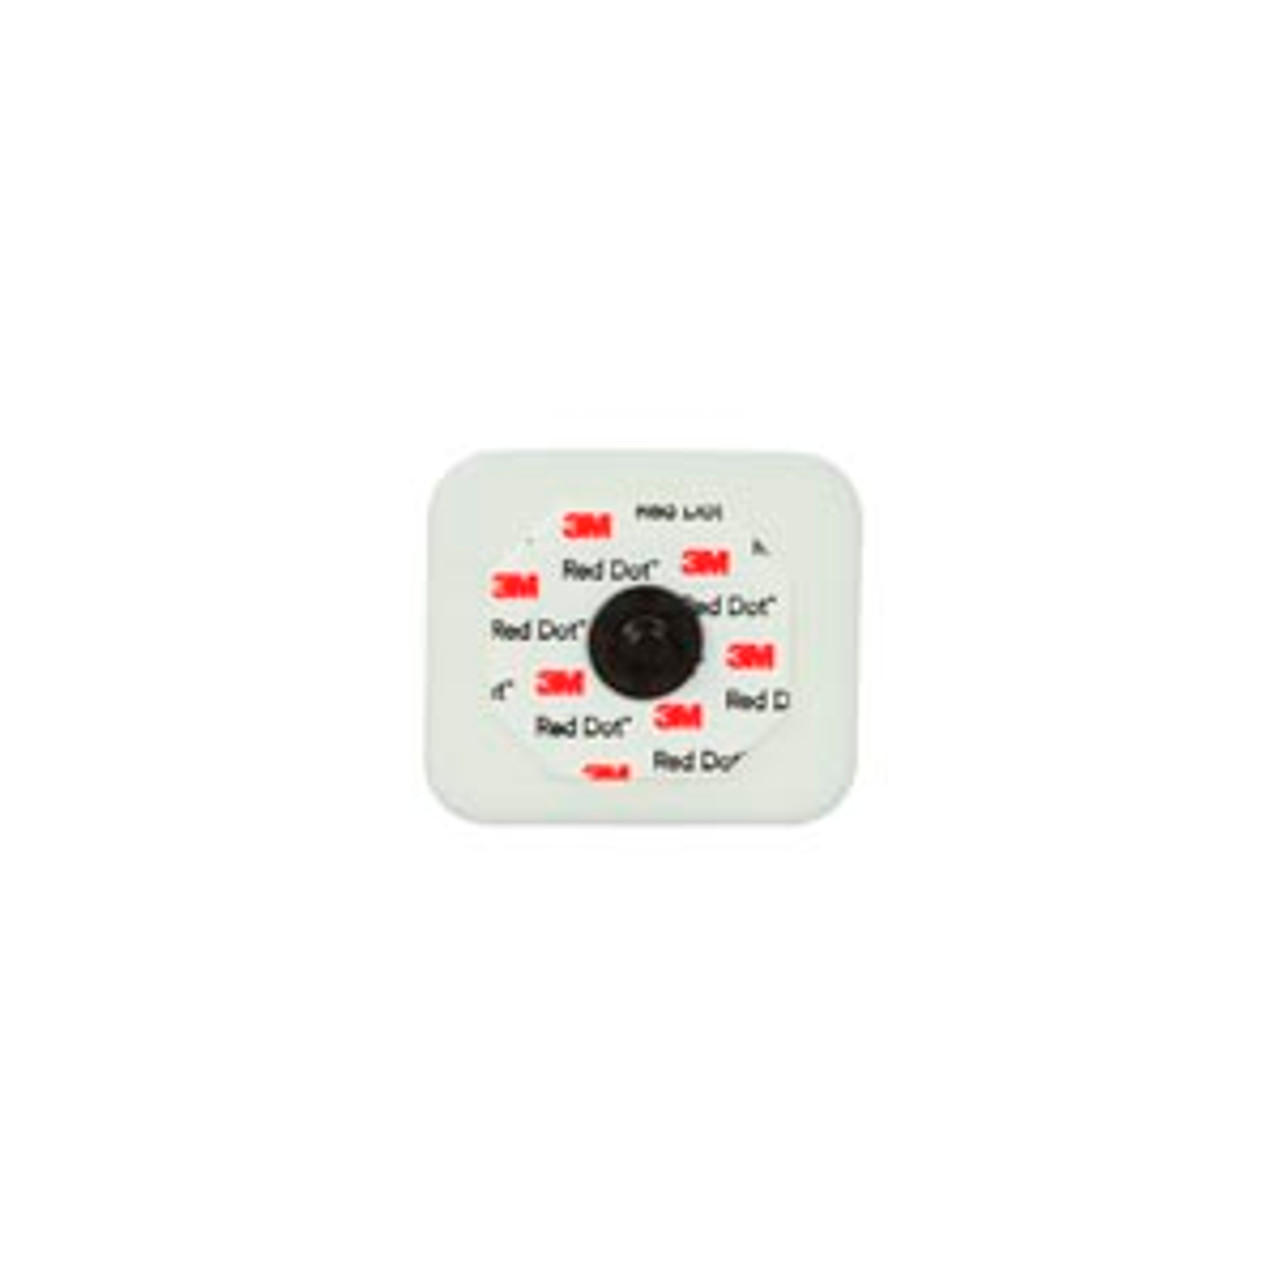 3M RED DOT MONITORING ELECTRODES WITH FOAM TAPE & STICKY GEL, 2570-3